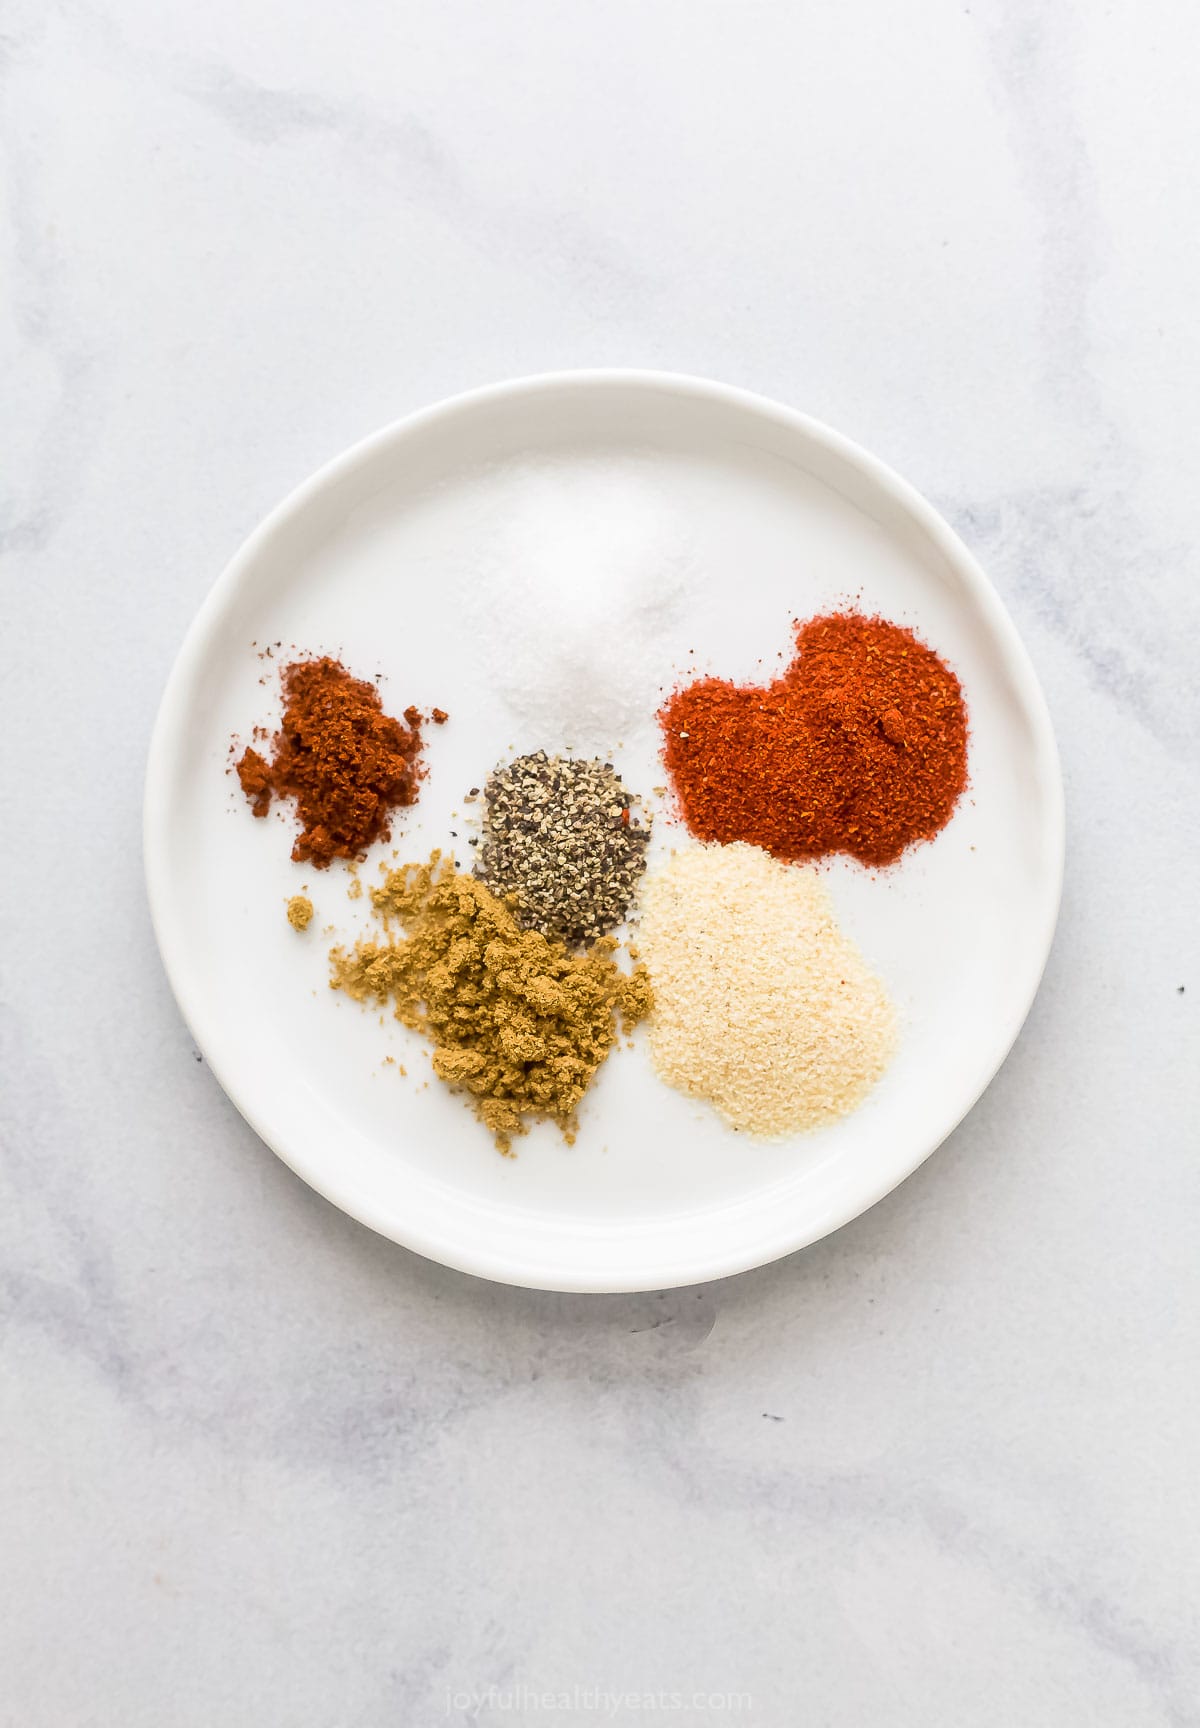 Spices for the spice mix in a plate. 